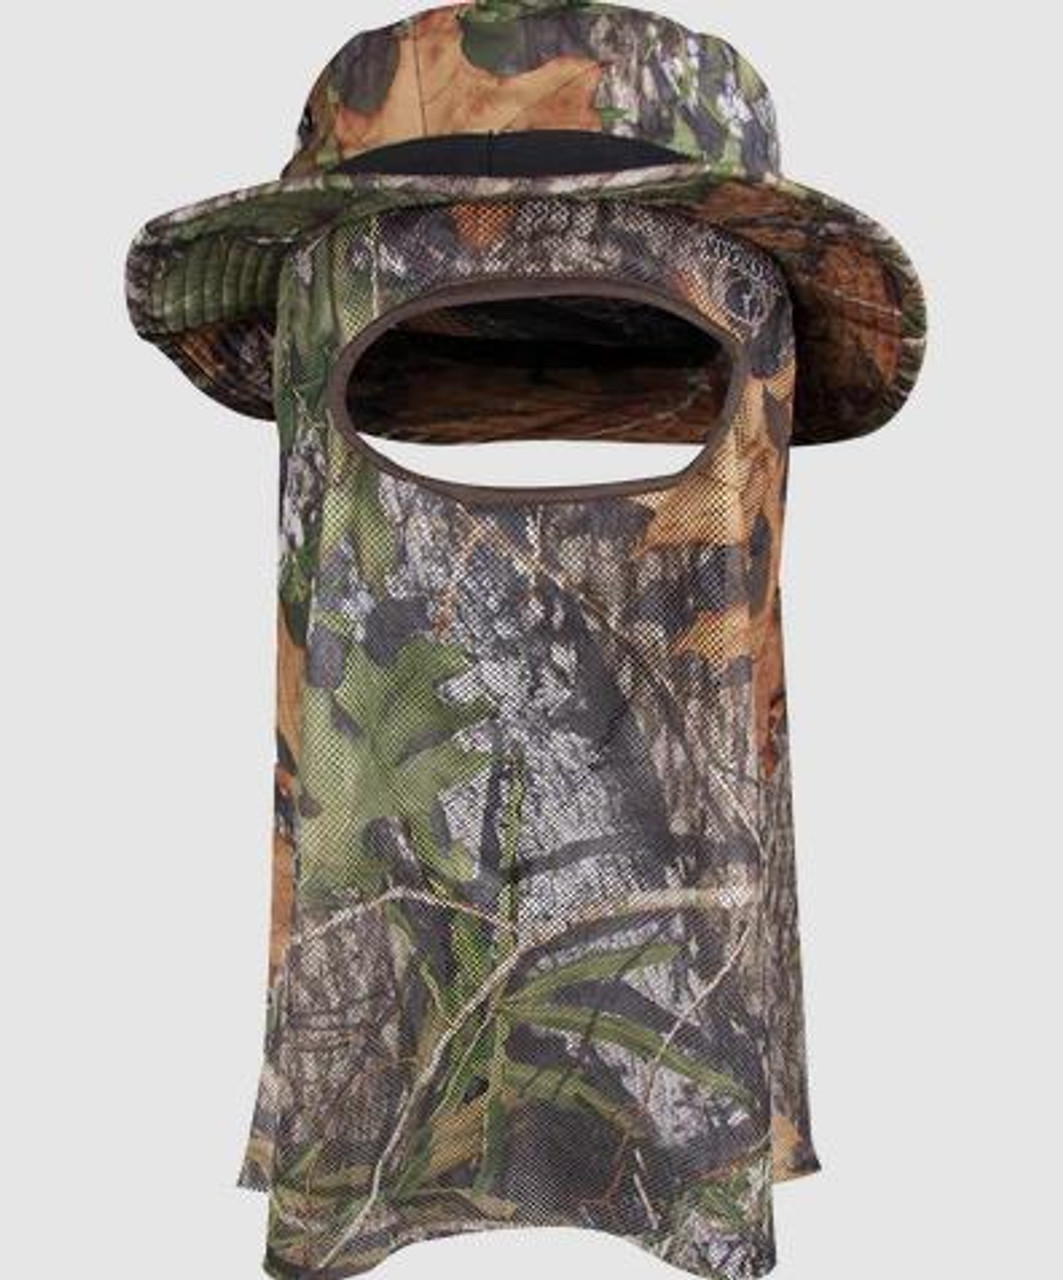 https://cdn11.bigcommerce.com/s-zm4ewfchee/images/stencil/1280x1280/products/8452/32515/Drake-Big-Bob-Boonie-Hat-With-Mask-XL-Mossy-Oak-Obsession-400100000229_image1__27649.1680212008.jpg?c=1